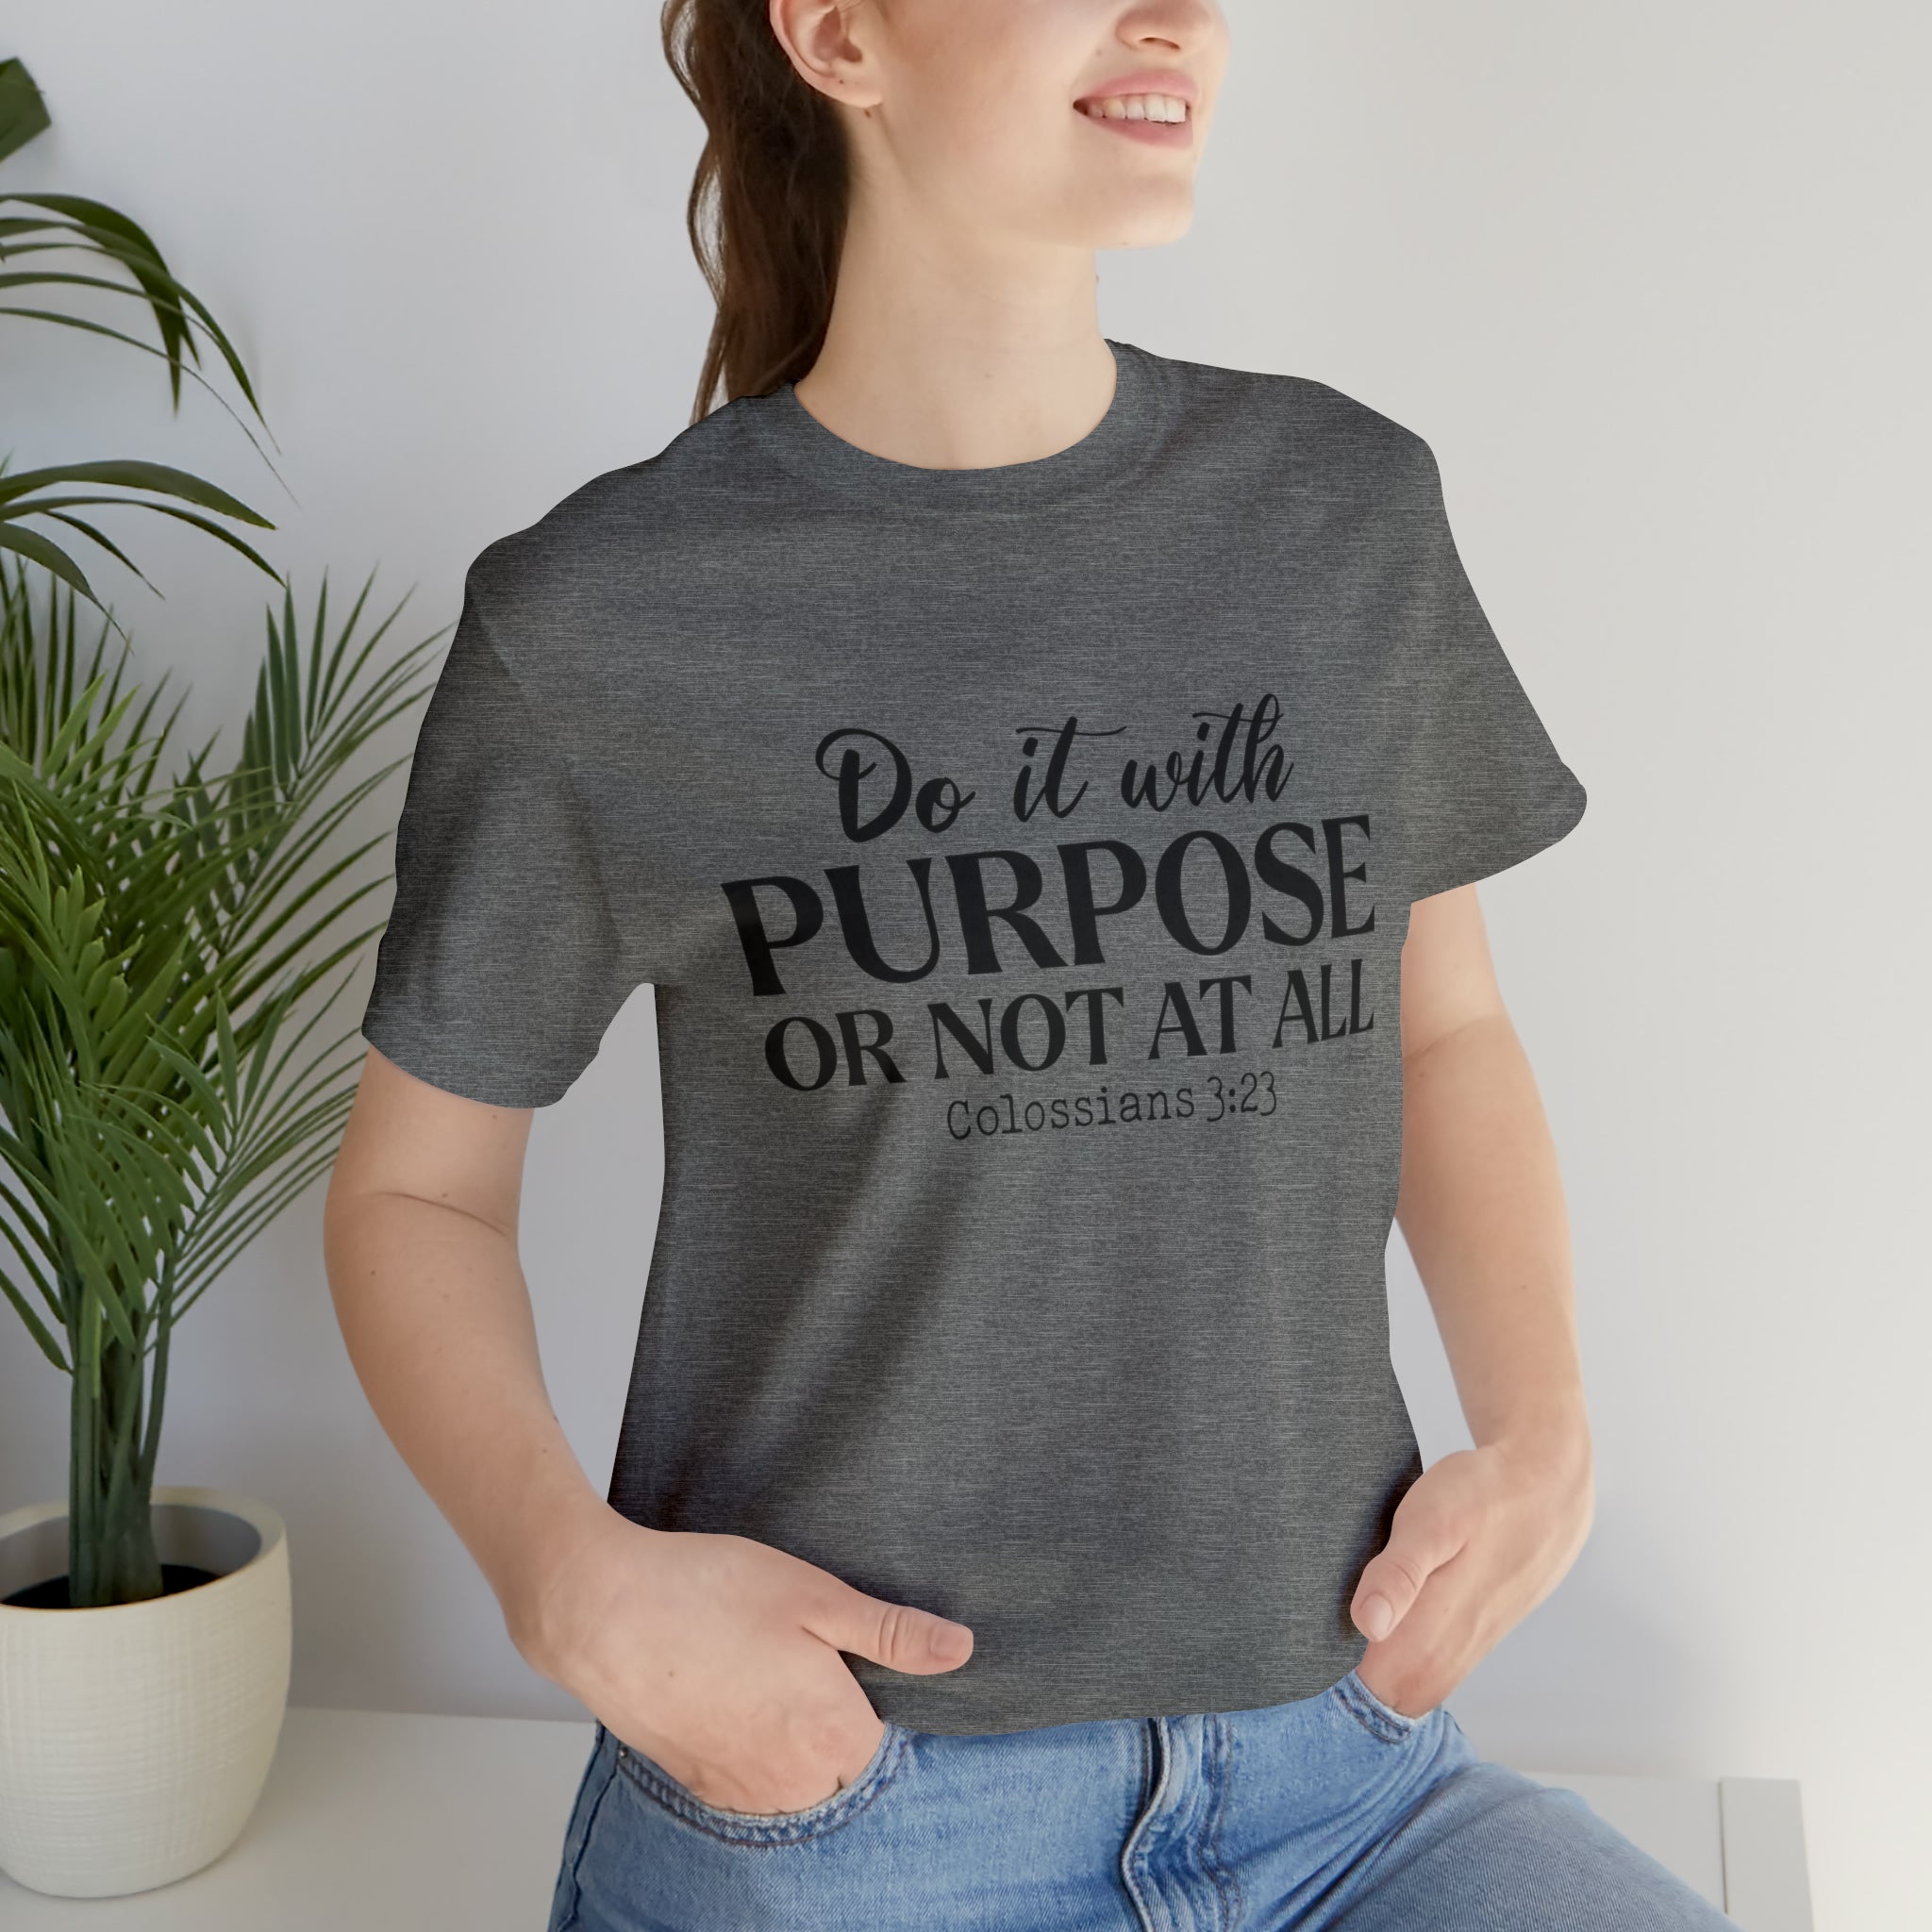 Do It With Purpose Tee